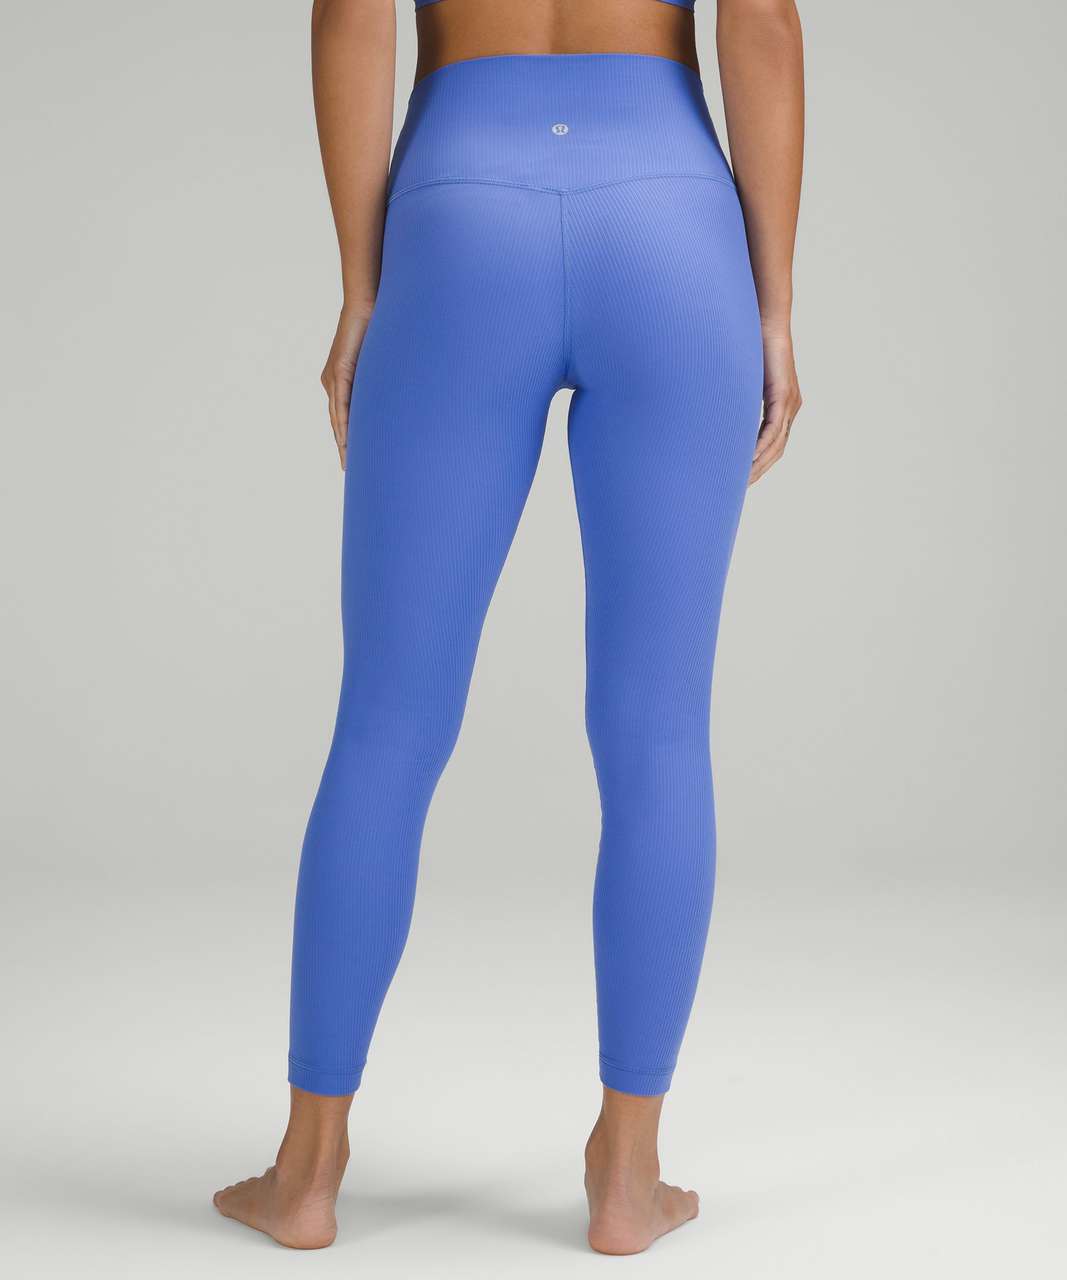 lululemon athletica, Pants & Jumpsuits, Nwt Lululemon Instill High Rise  Tights 25 In Beautiful Charged Indigo